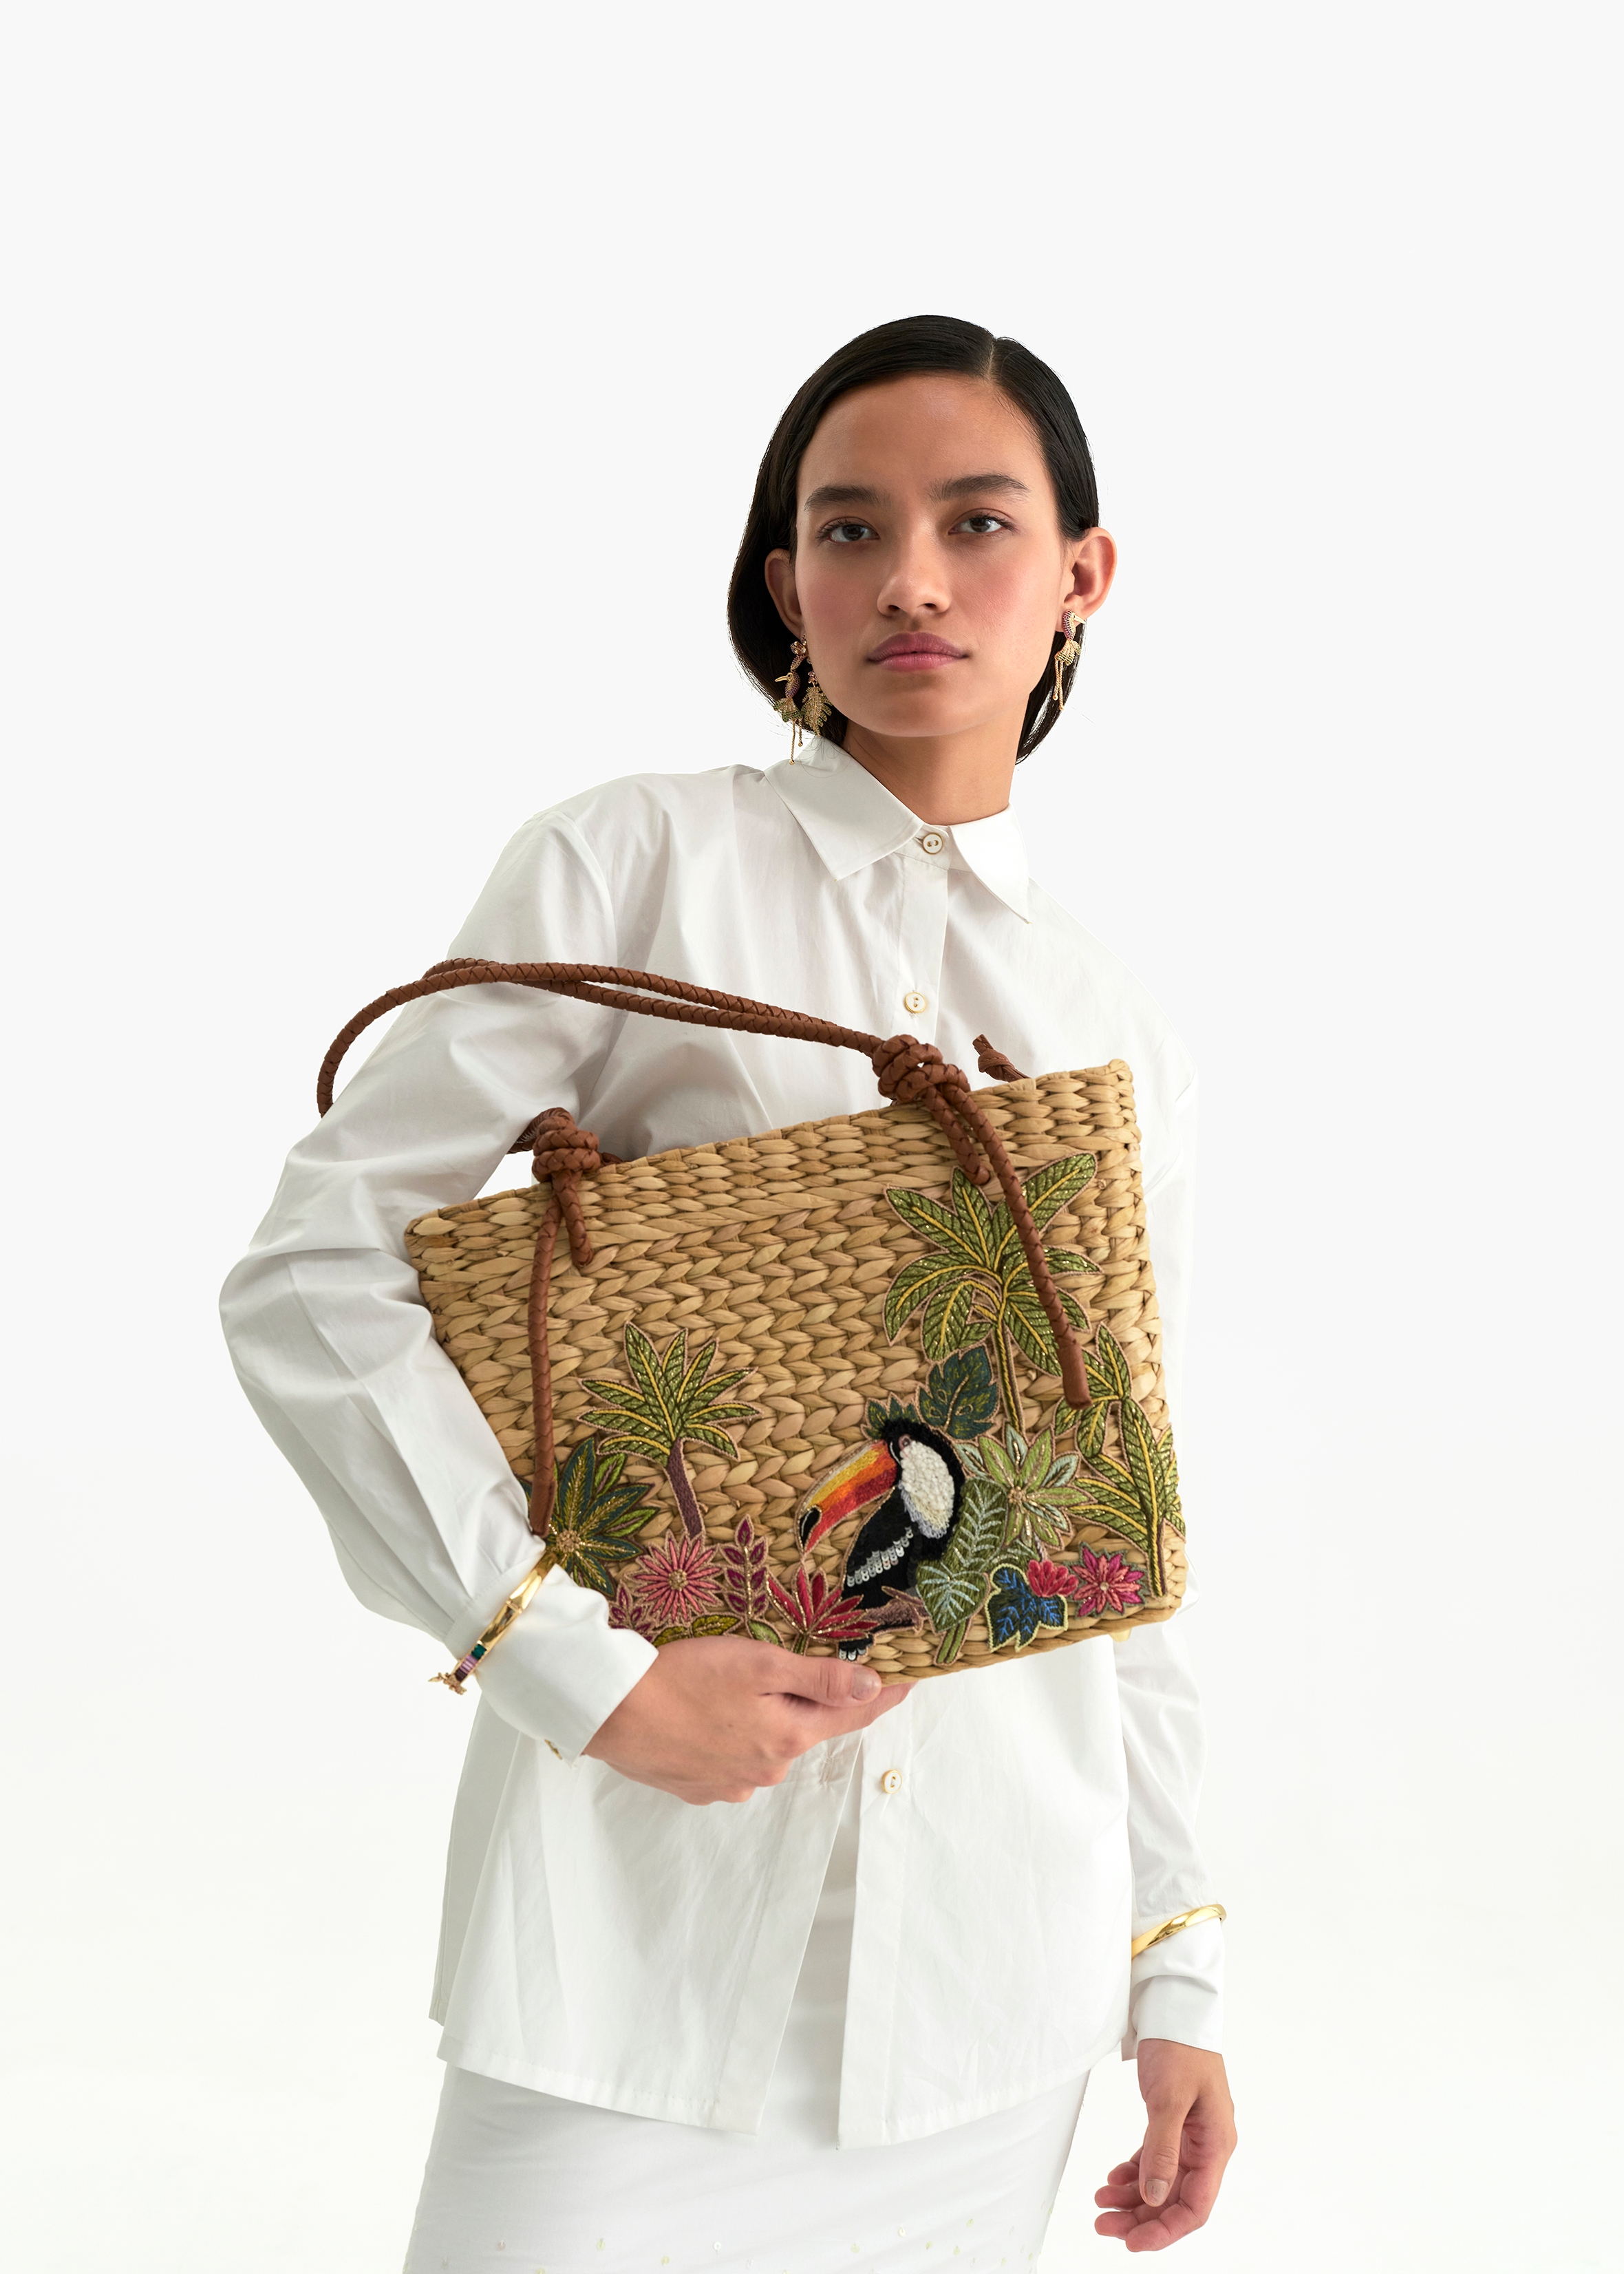 Kauna Grass Tote Bag with Wooden Handle